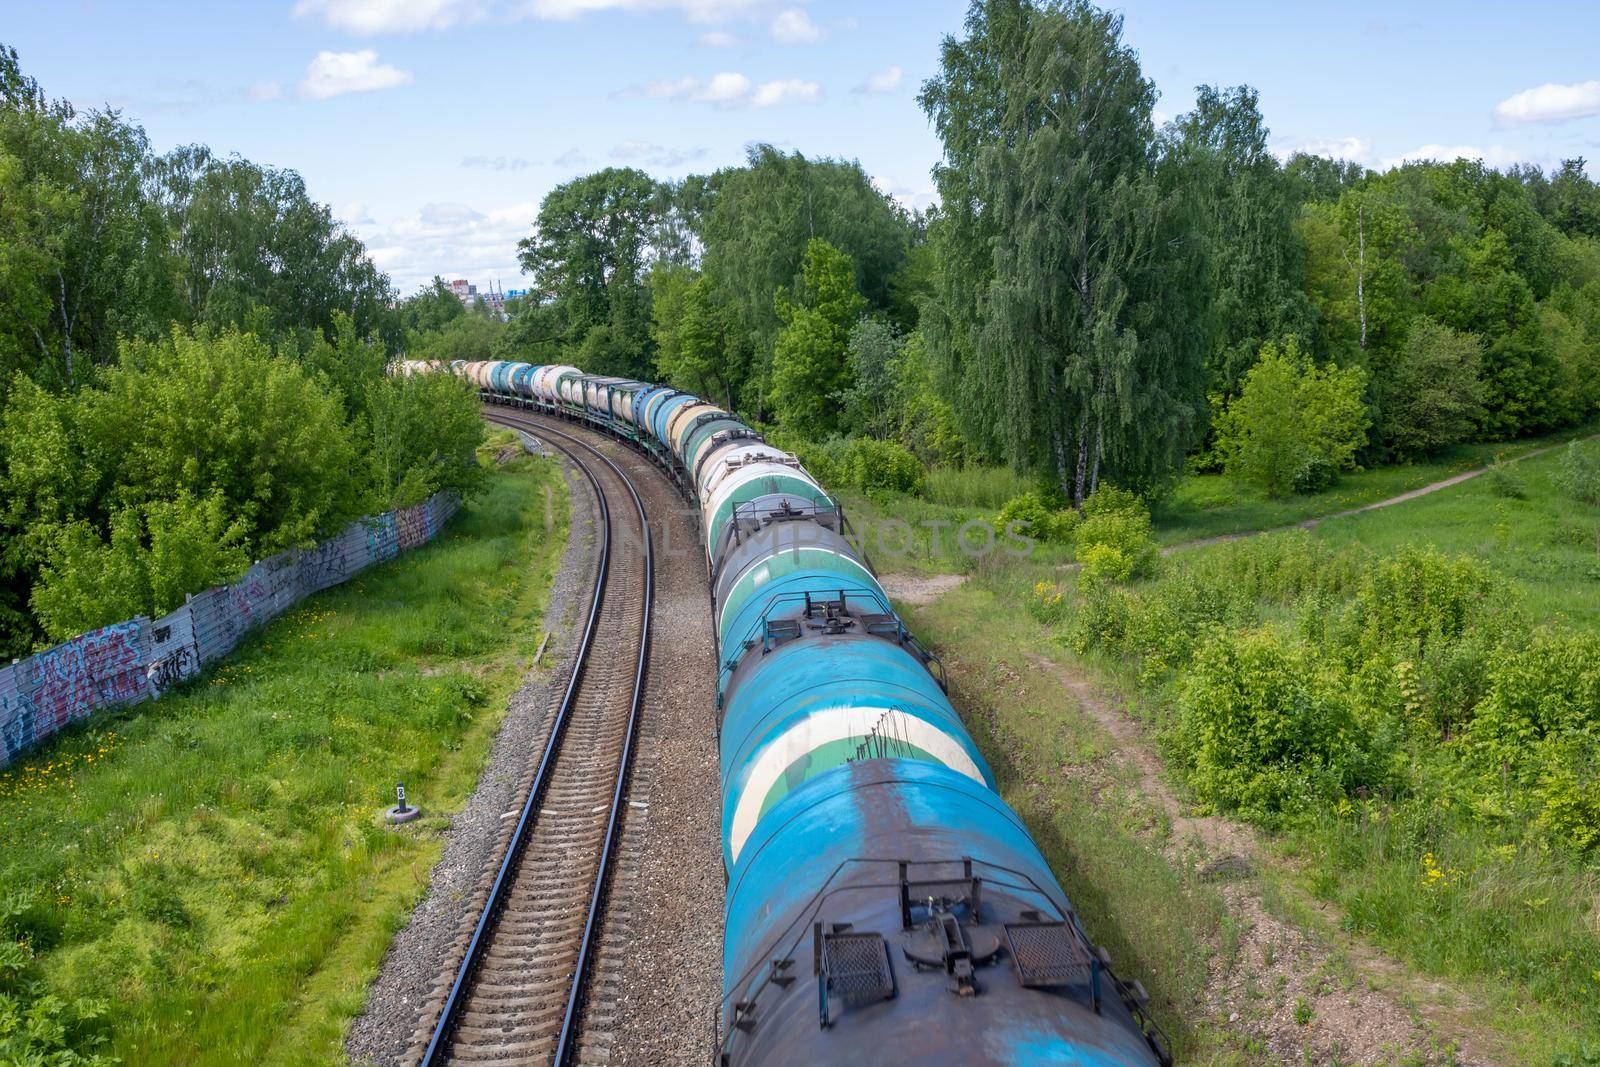 Fuel train, rolling stock with petrochemical tanks. Export.